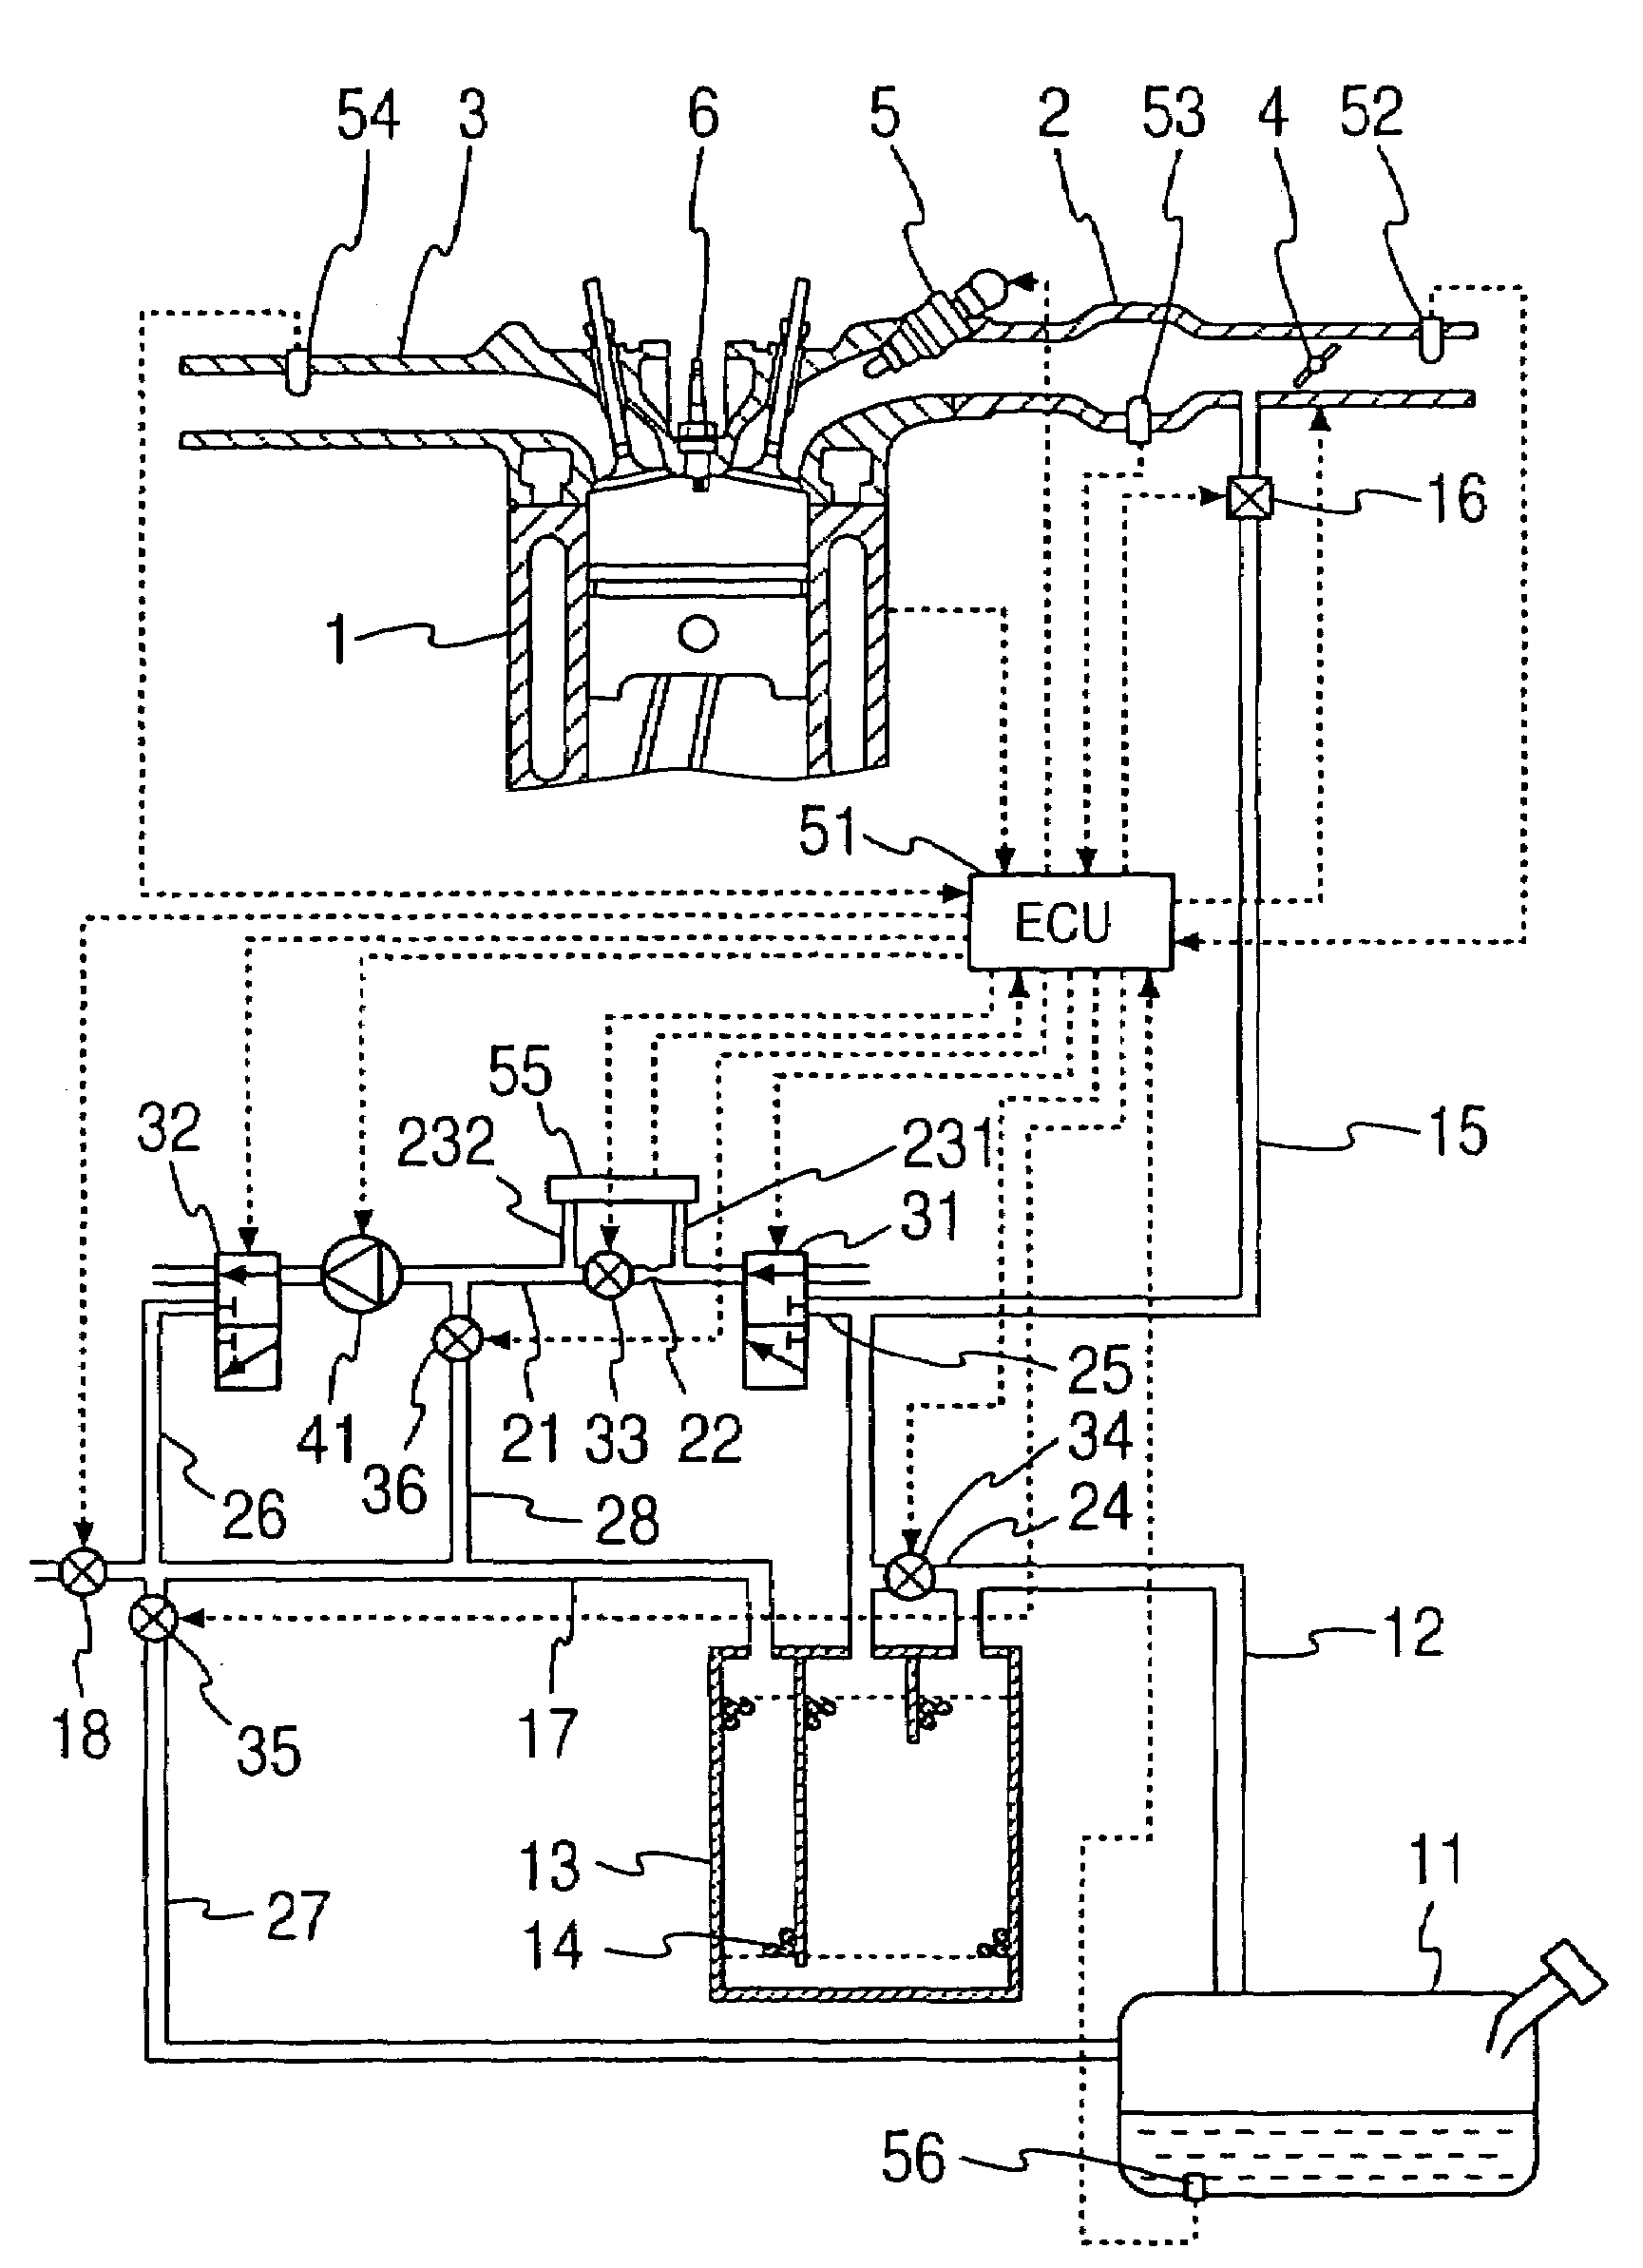 Fuel nature measuring device of internal combustion engine and internal combustion engine having the same